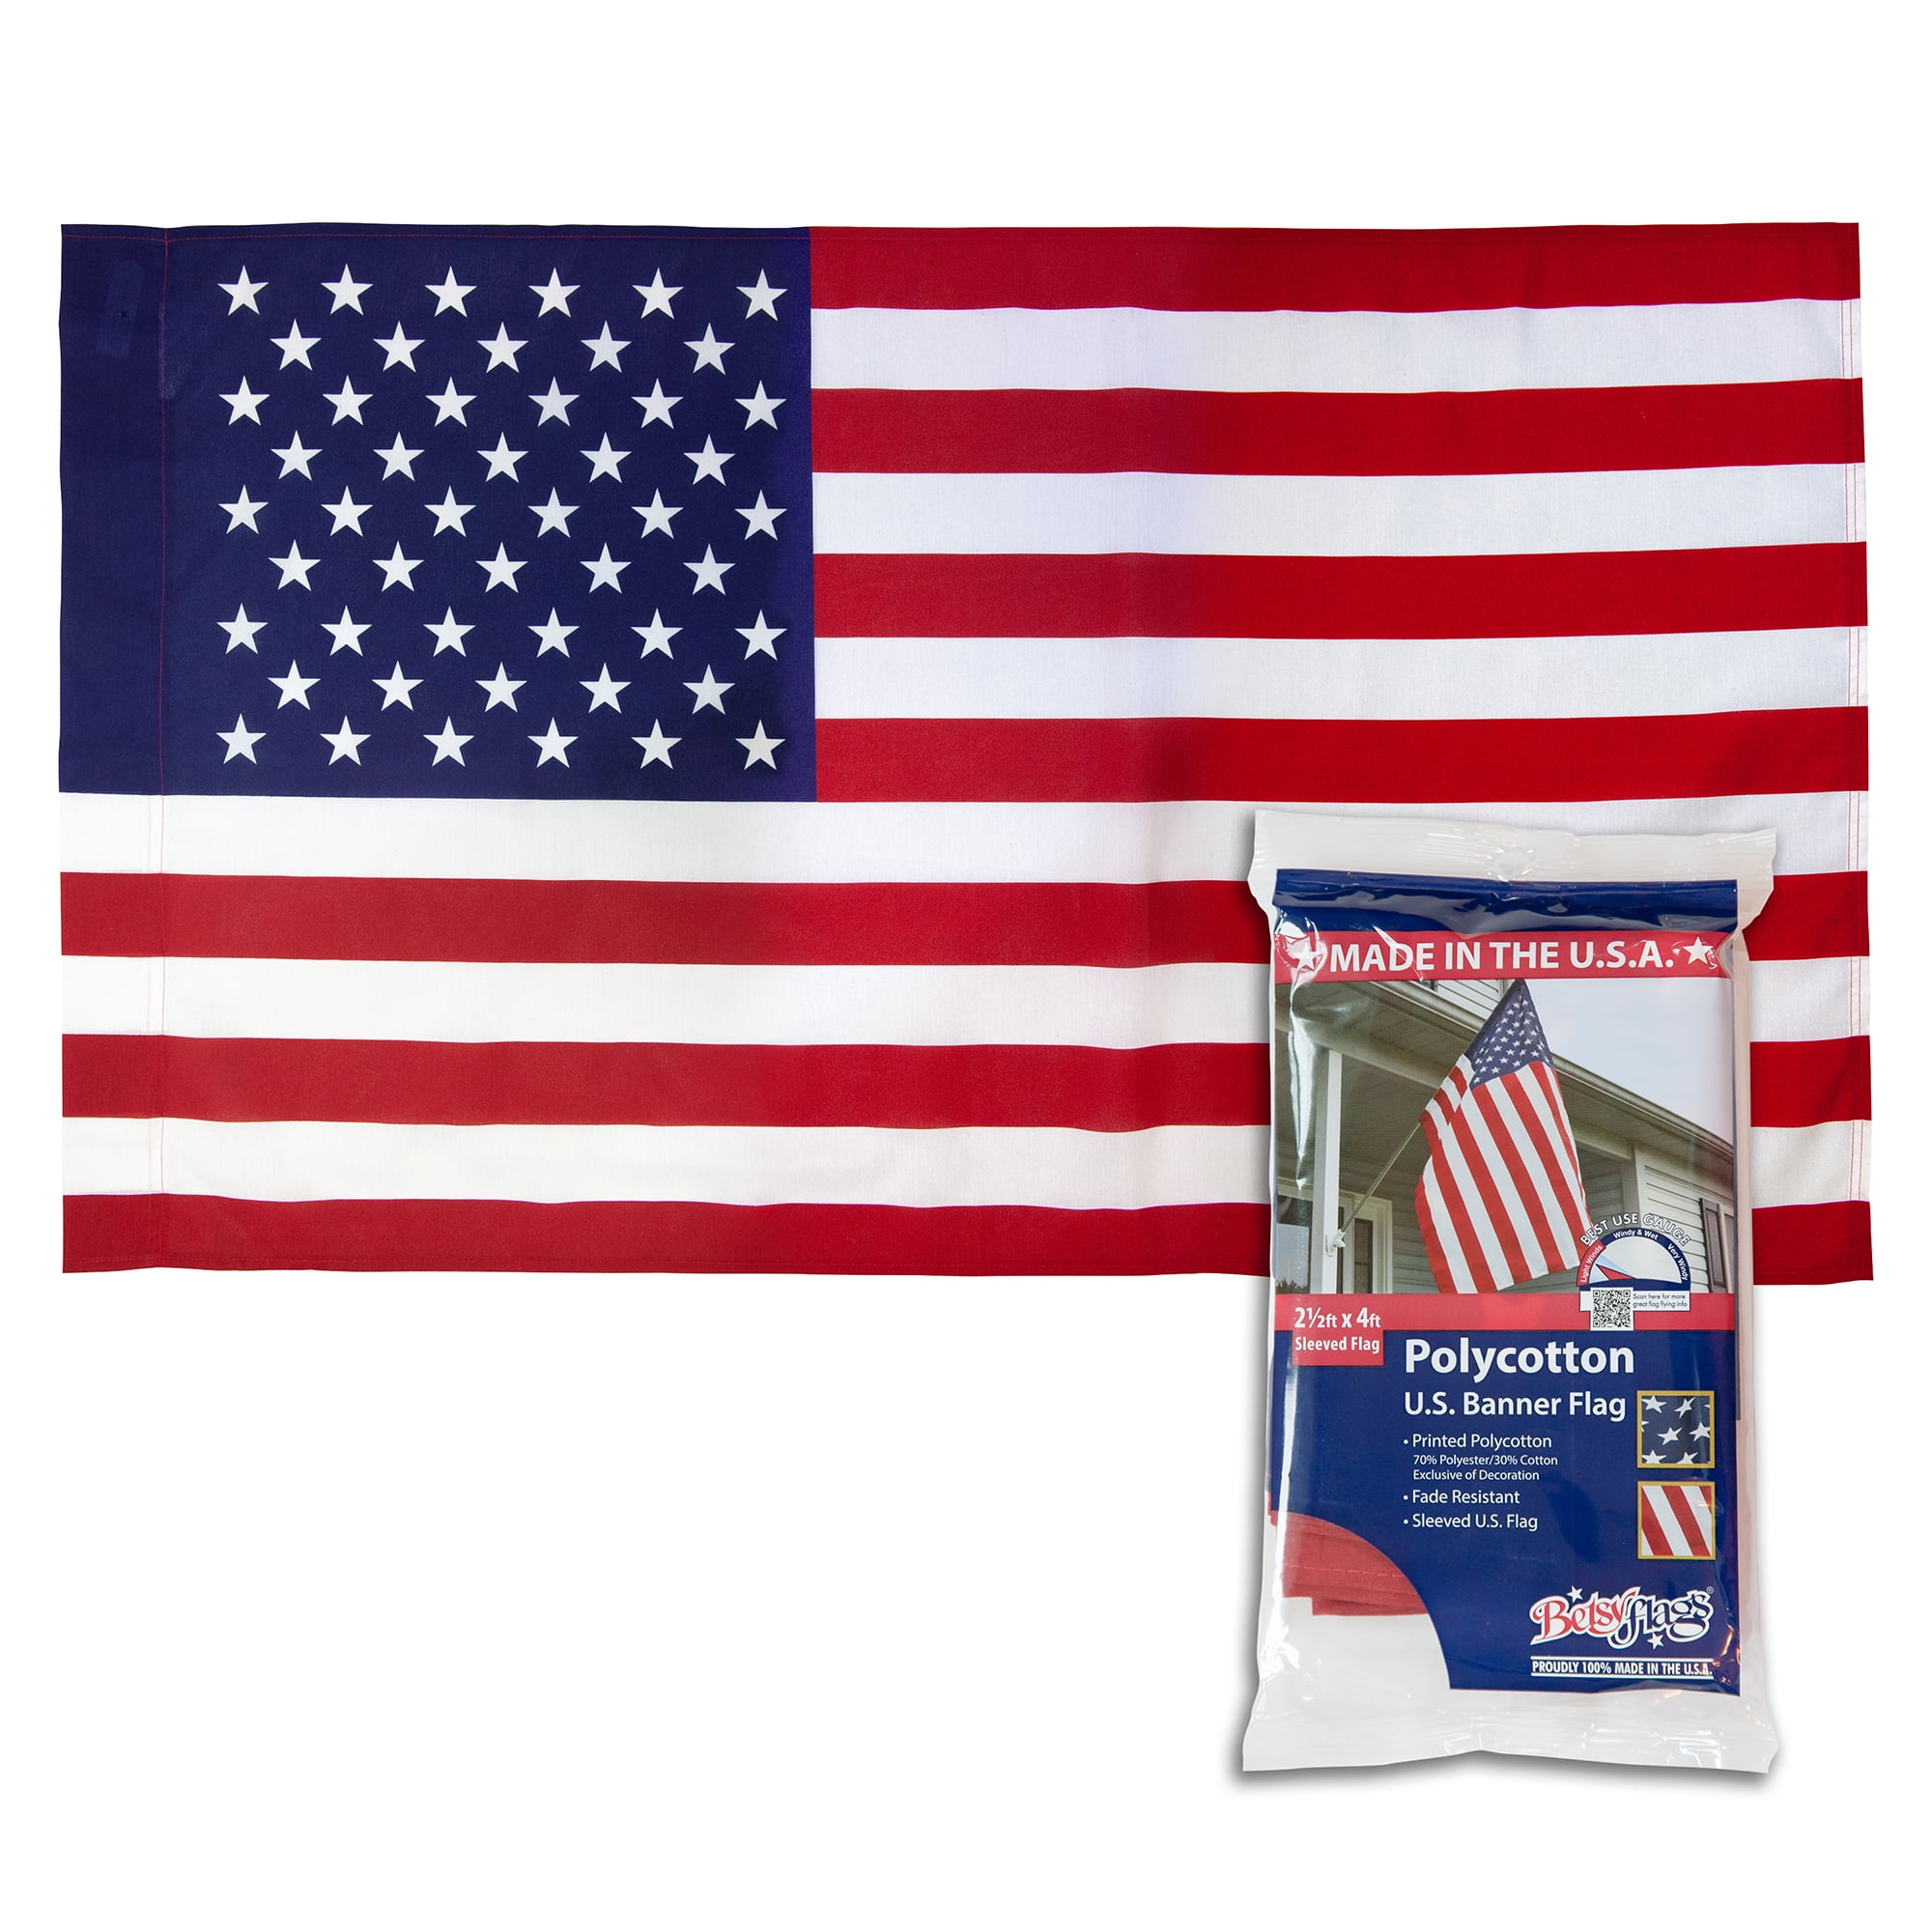 Printed Polycotton American Flag, Sleeved Banner Betsy Flags, 2.5' x 4'